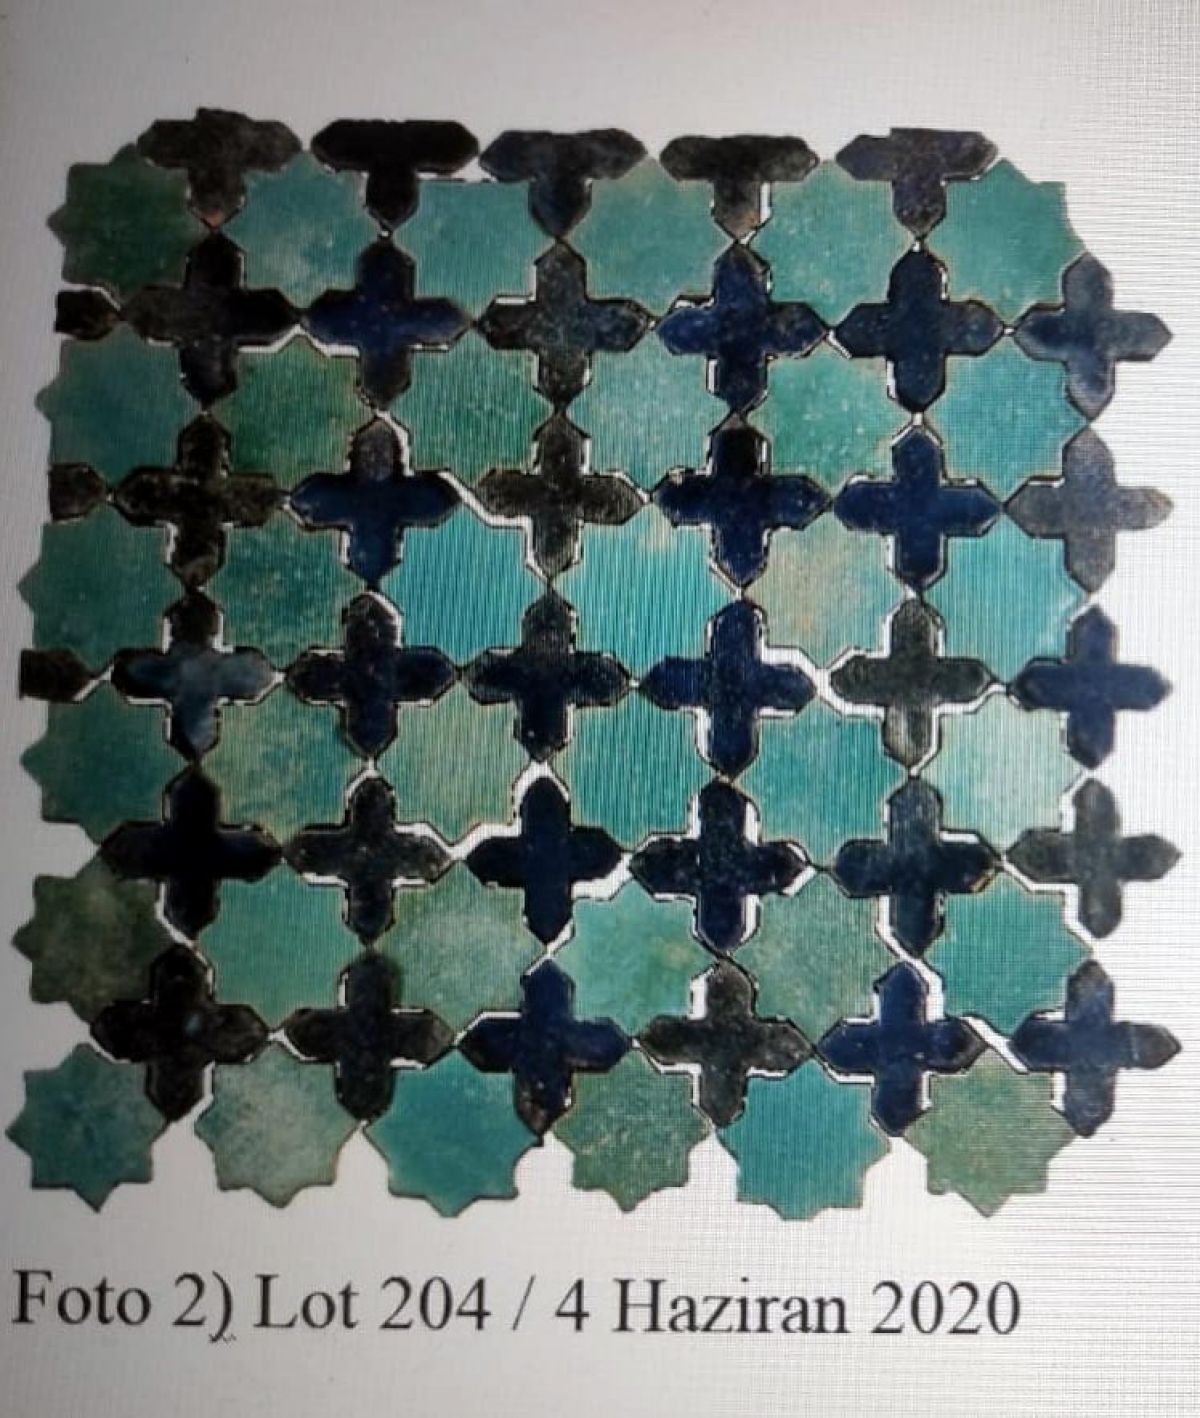 The tiles stolen from Adana Great Mosque 19 years ago came from the Netherlands #2